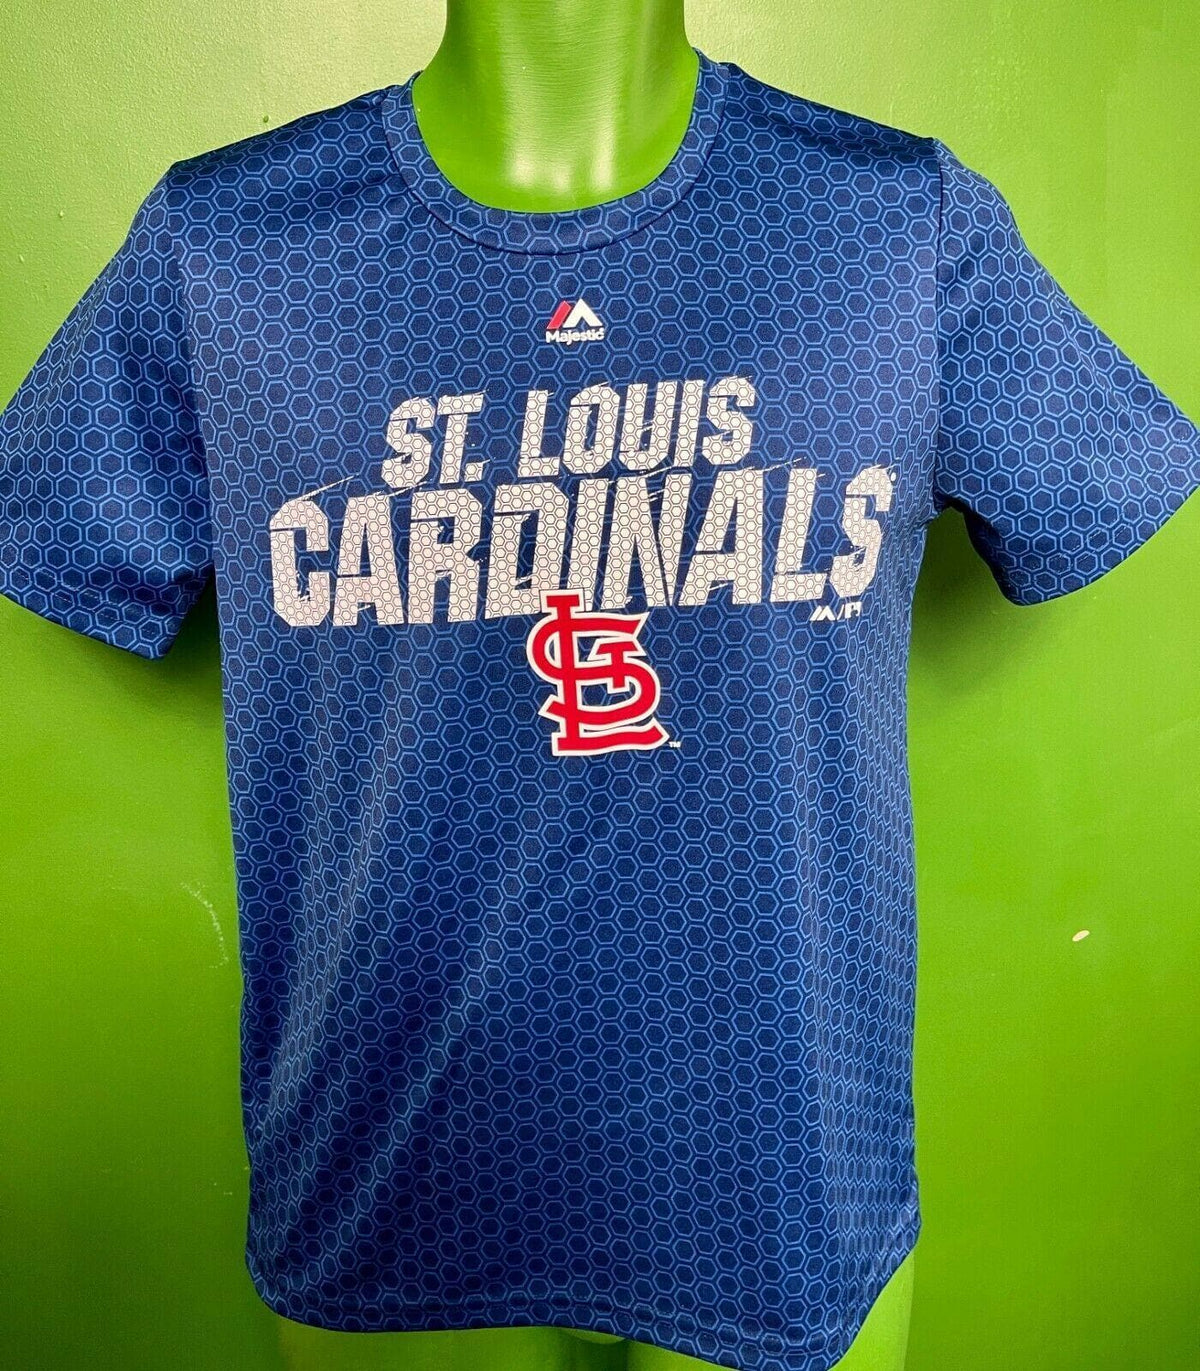 MLB St Louis Cardinals Majestic Patterned T-Shirt Youth Large 14-16